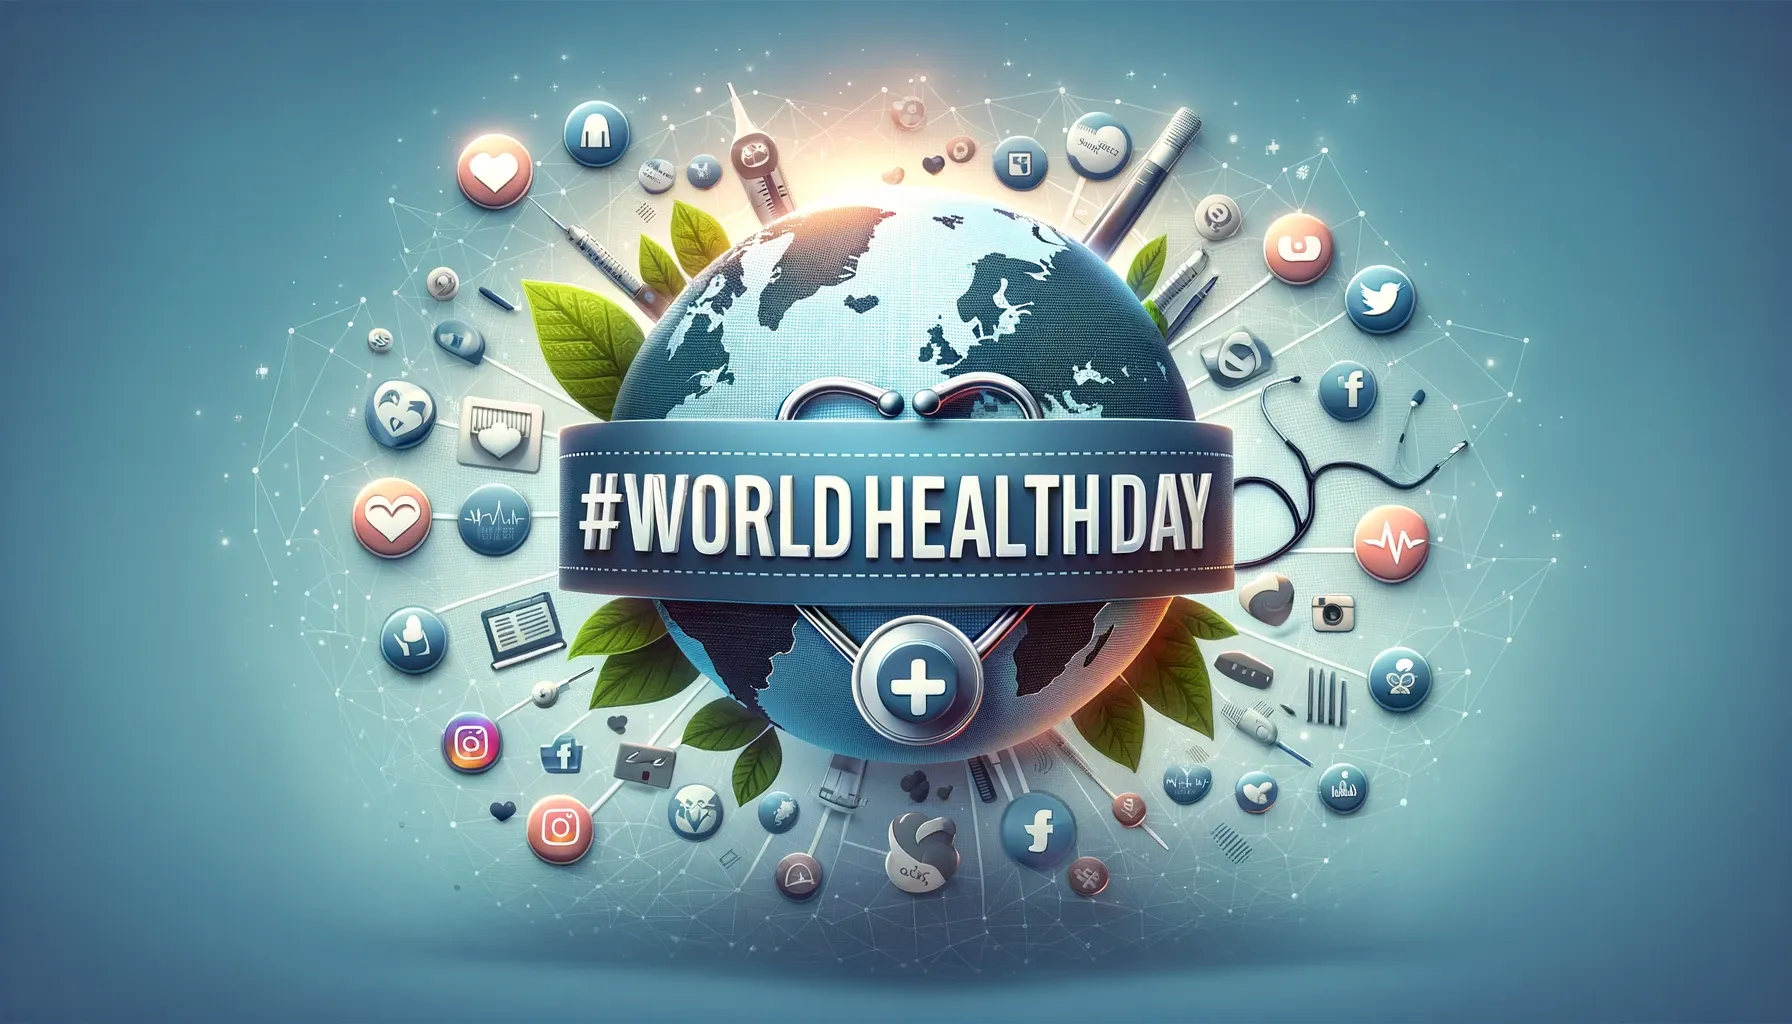 World Health Day Hashtags for Your Social Media